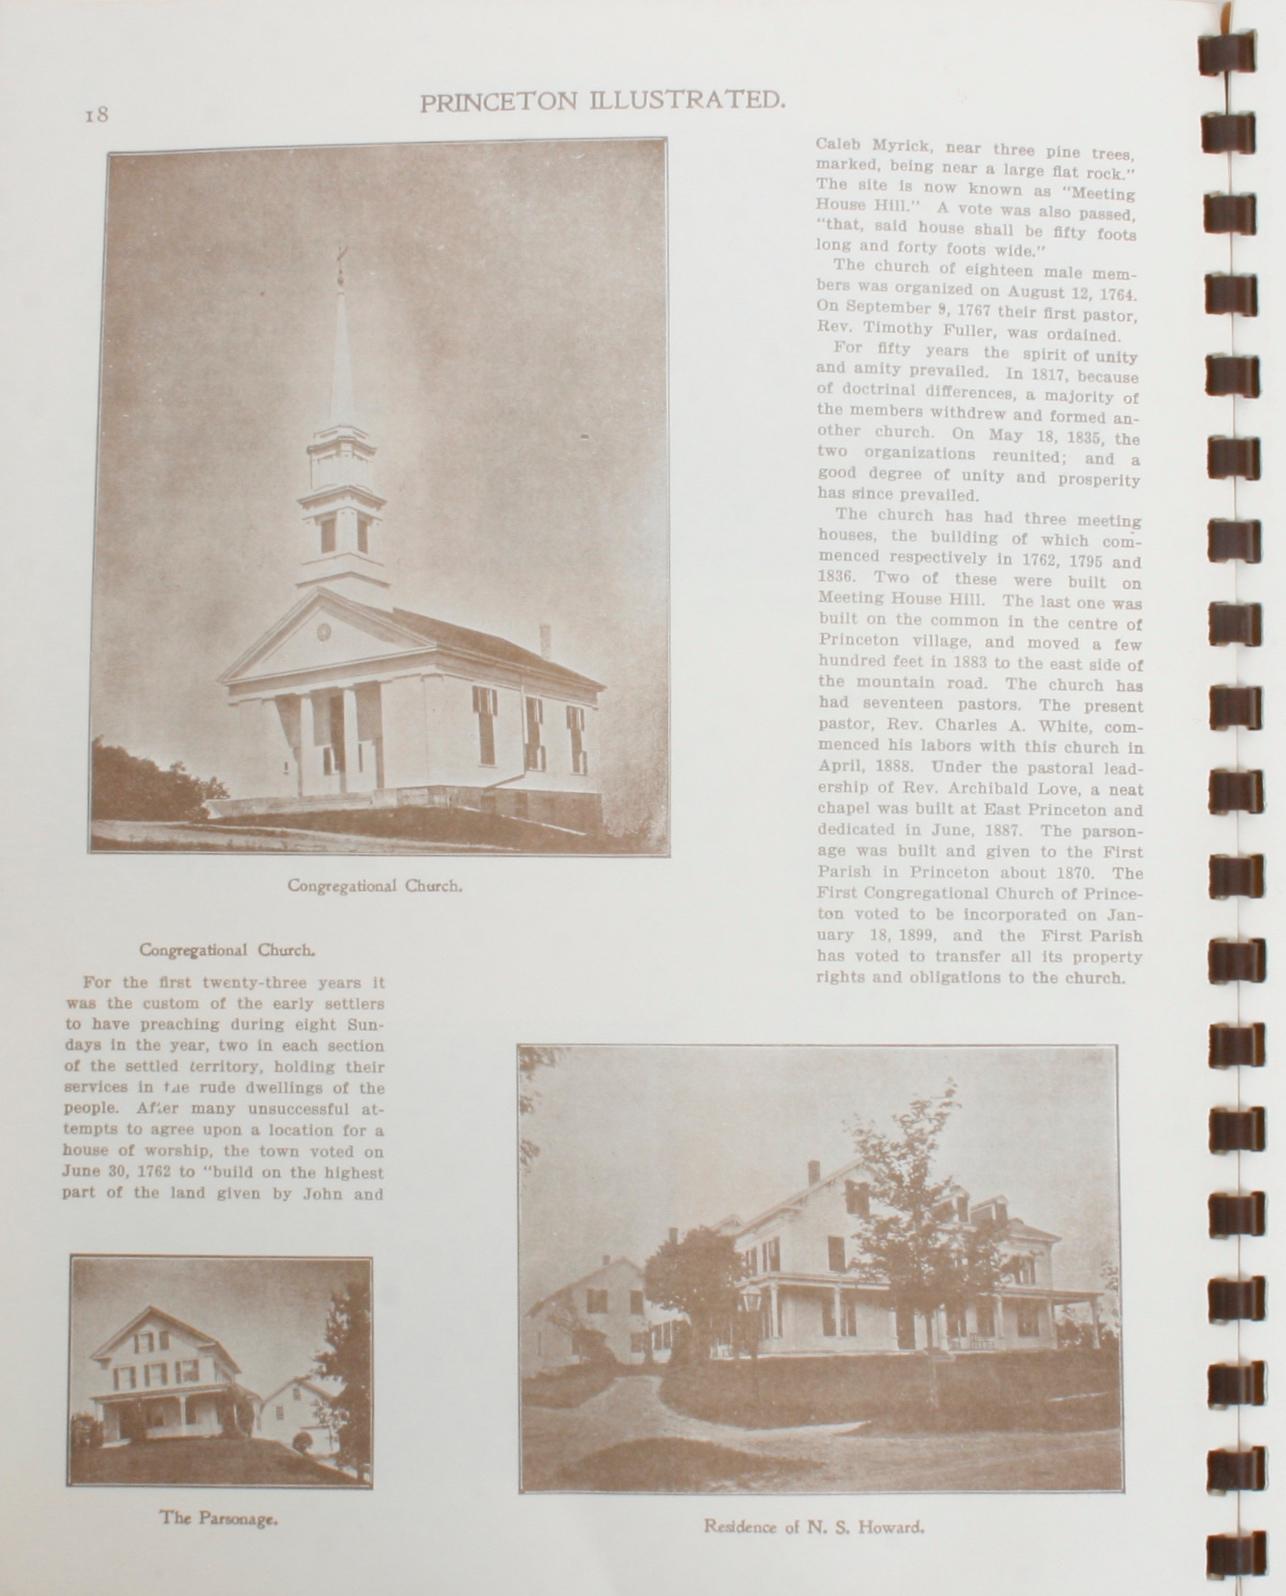 Princeton Mass, Illustrated 1900, as of 1972 5